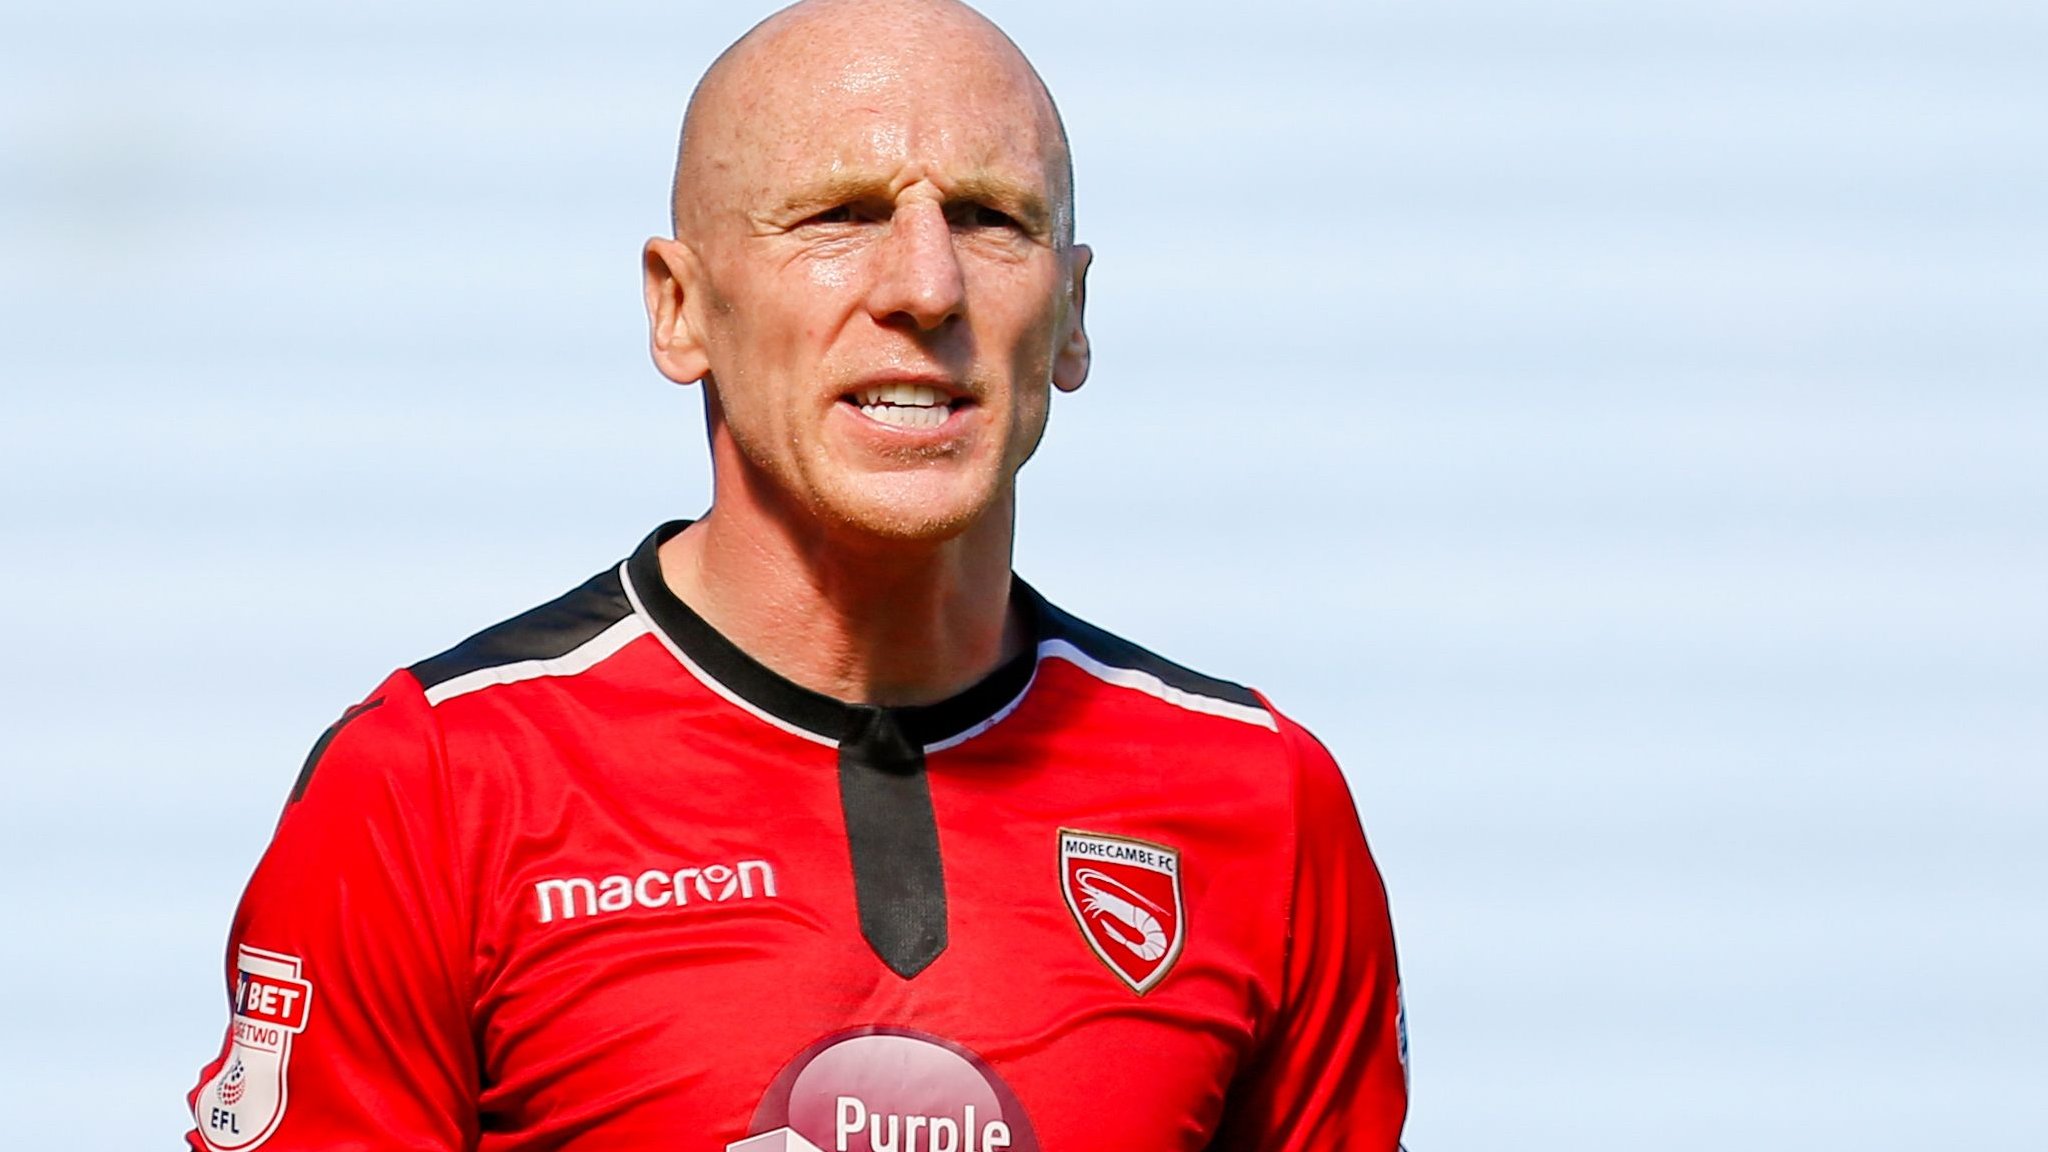 After revealing his own struggles, players come to Morecambe's Ellison for depression advice